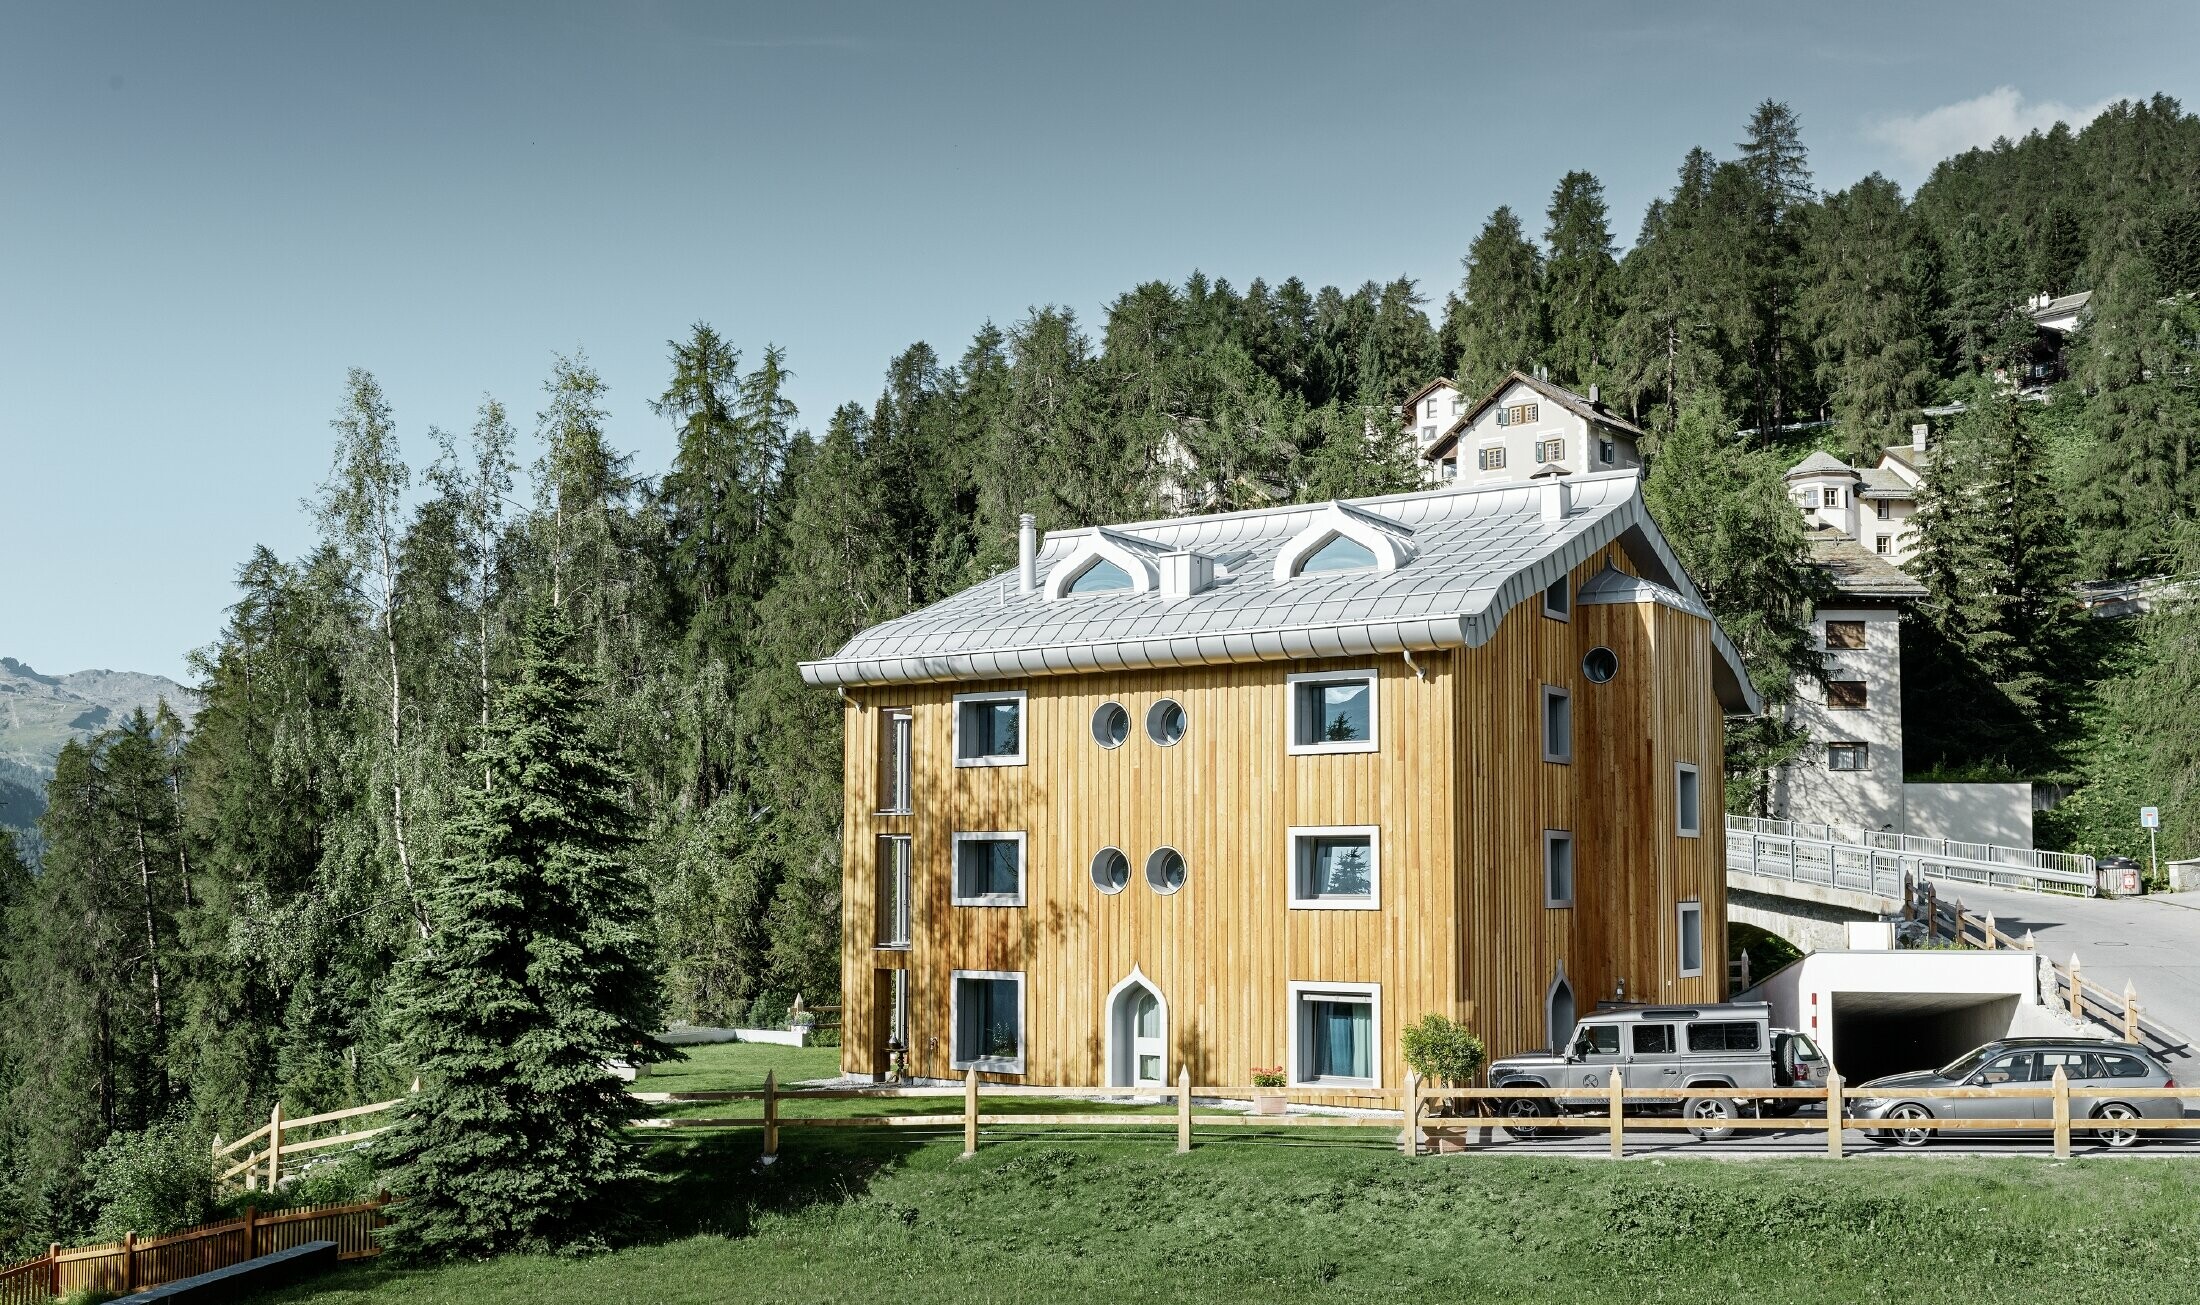 Residential complex in St. Moritz (Switzerland) with a wooden façade and an aluminium roof with undulating eaves in metallic silver